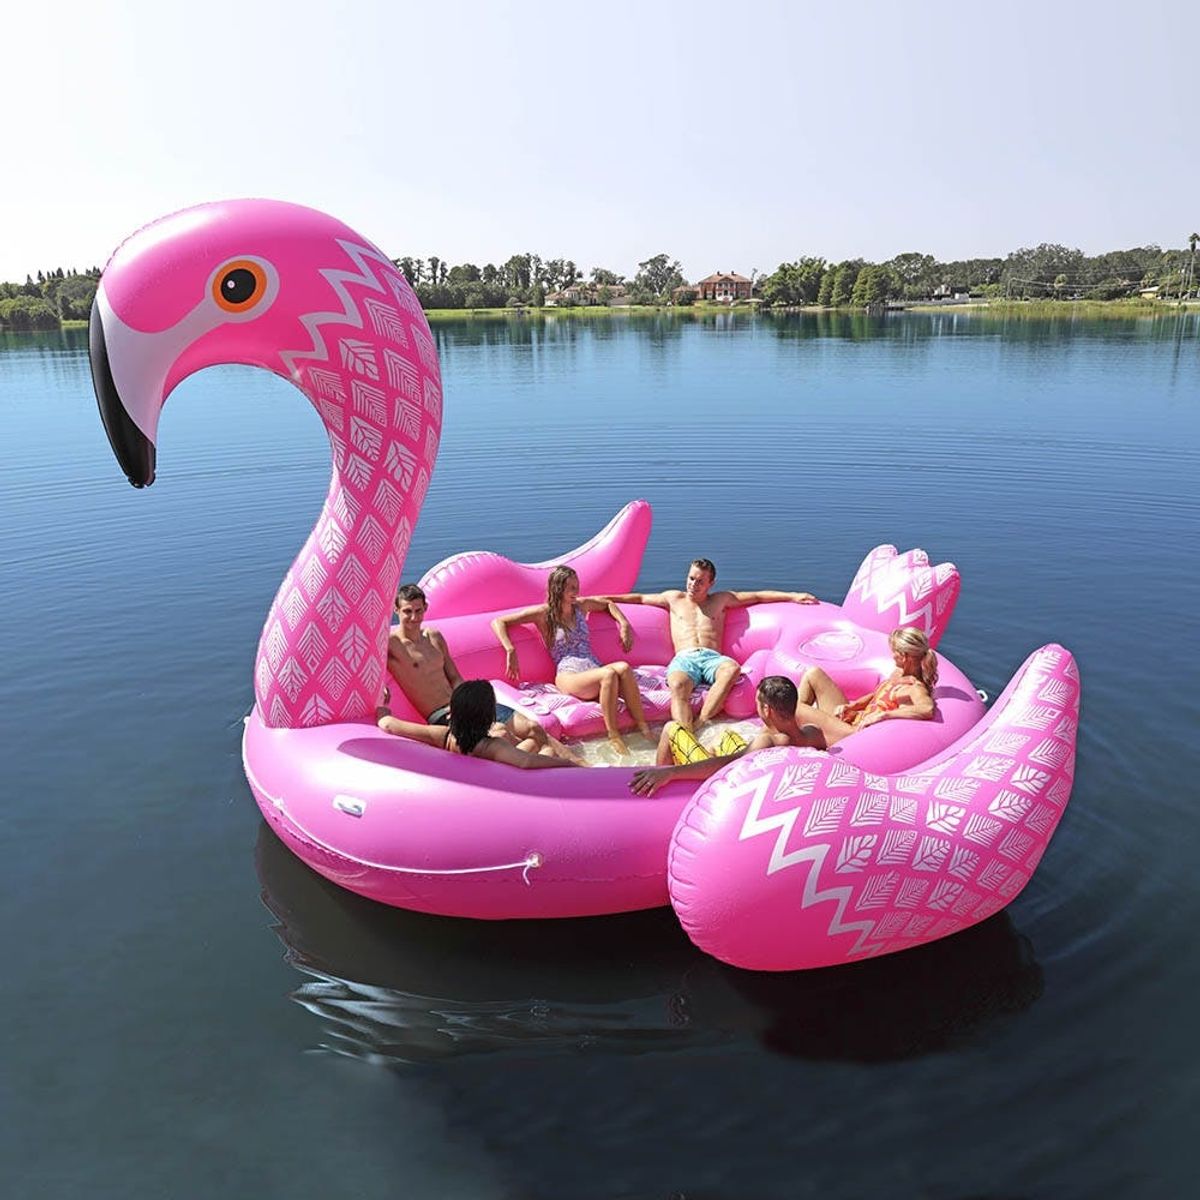 Giant Pool Floats Are a Thing And We Have Some Questions